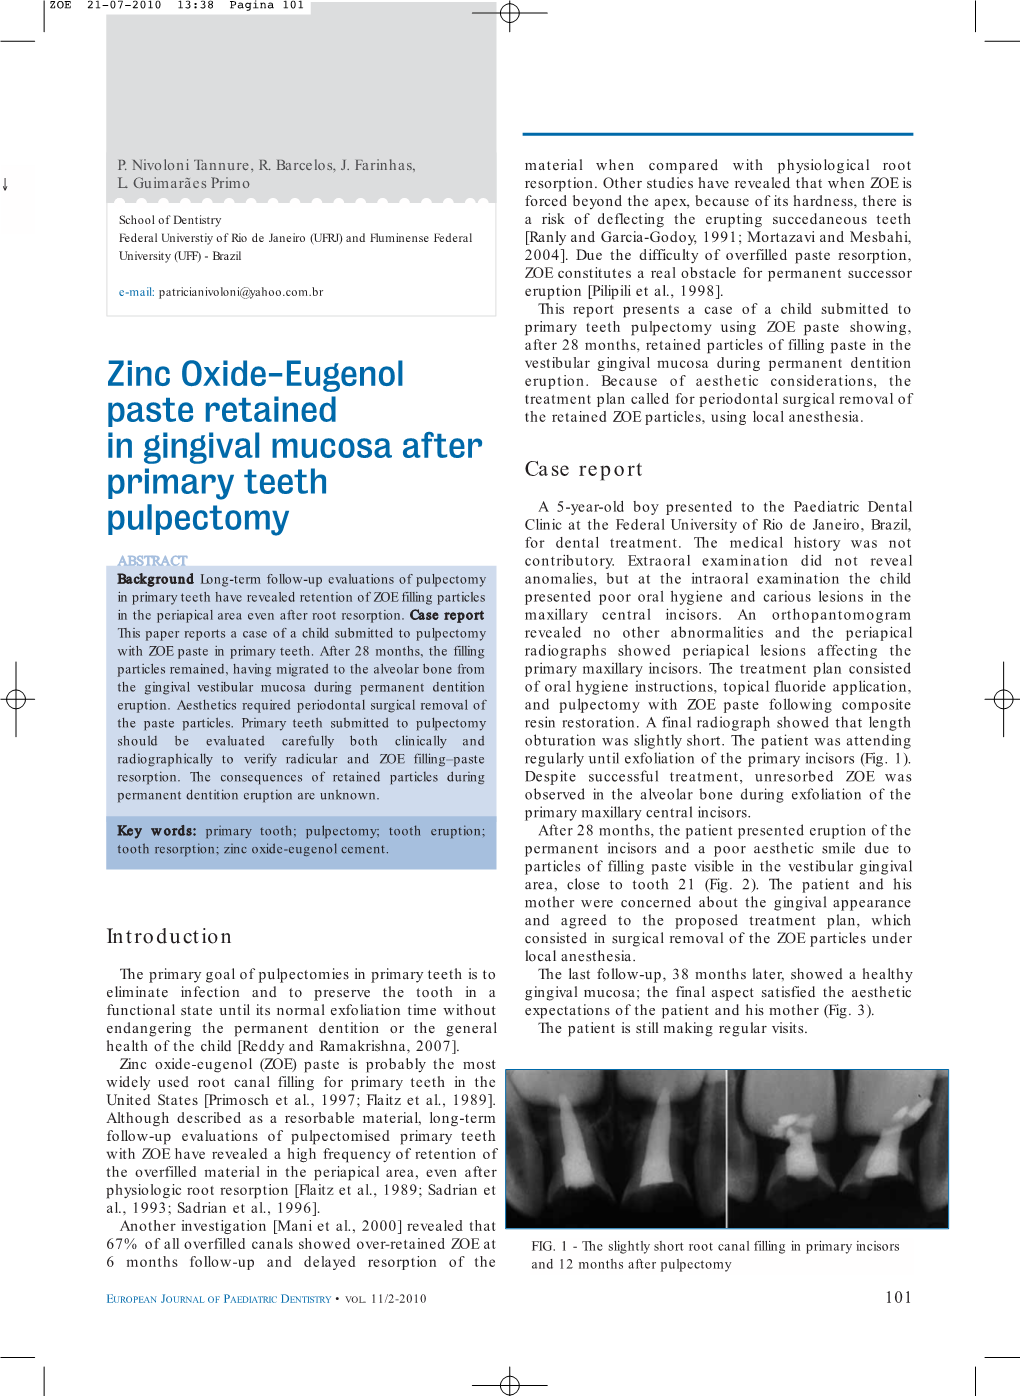 Zinc Oxide-Eugenol Paste Retained in Gingival Mucosa After Primary Teeth